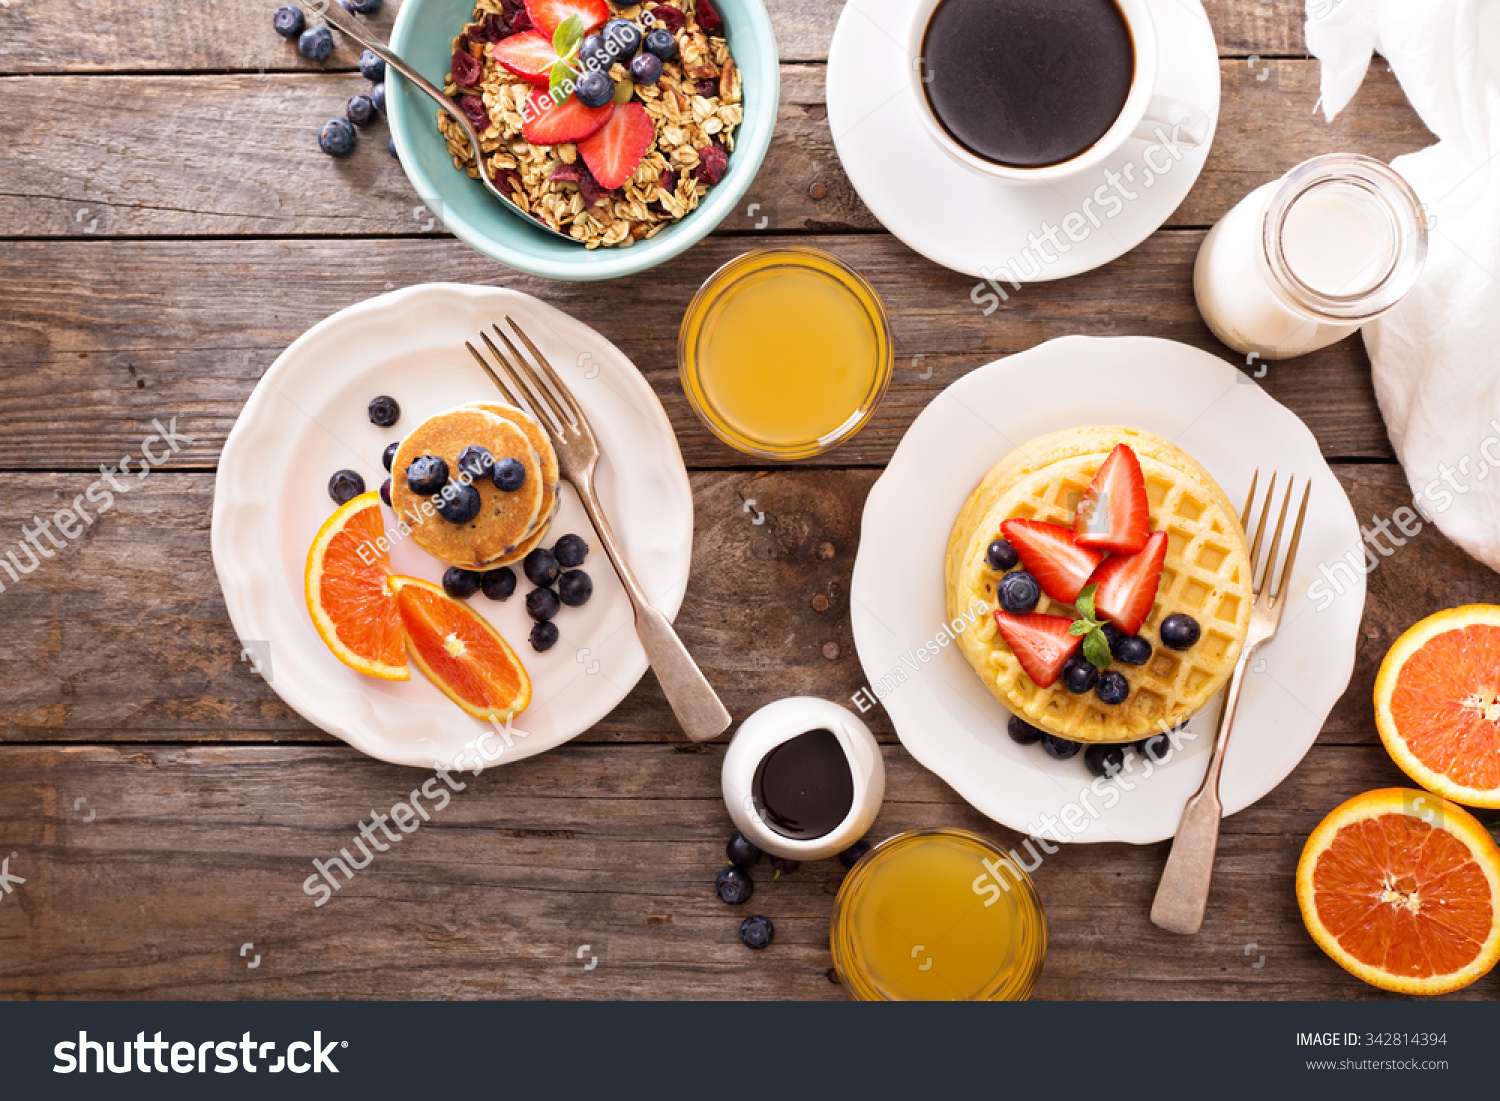 Breakfast table with waffles, granola and fresh berries #342814394